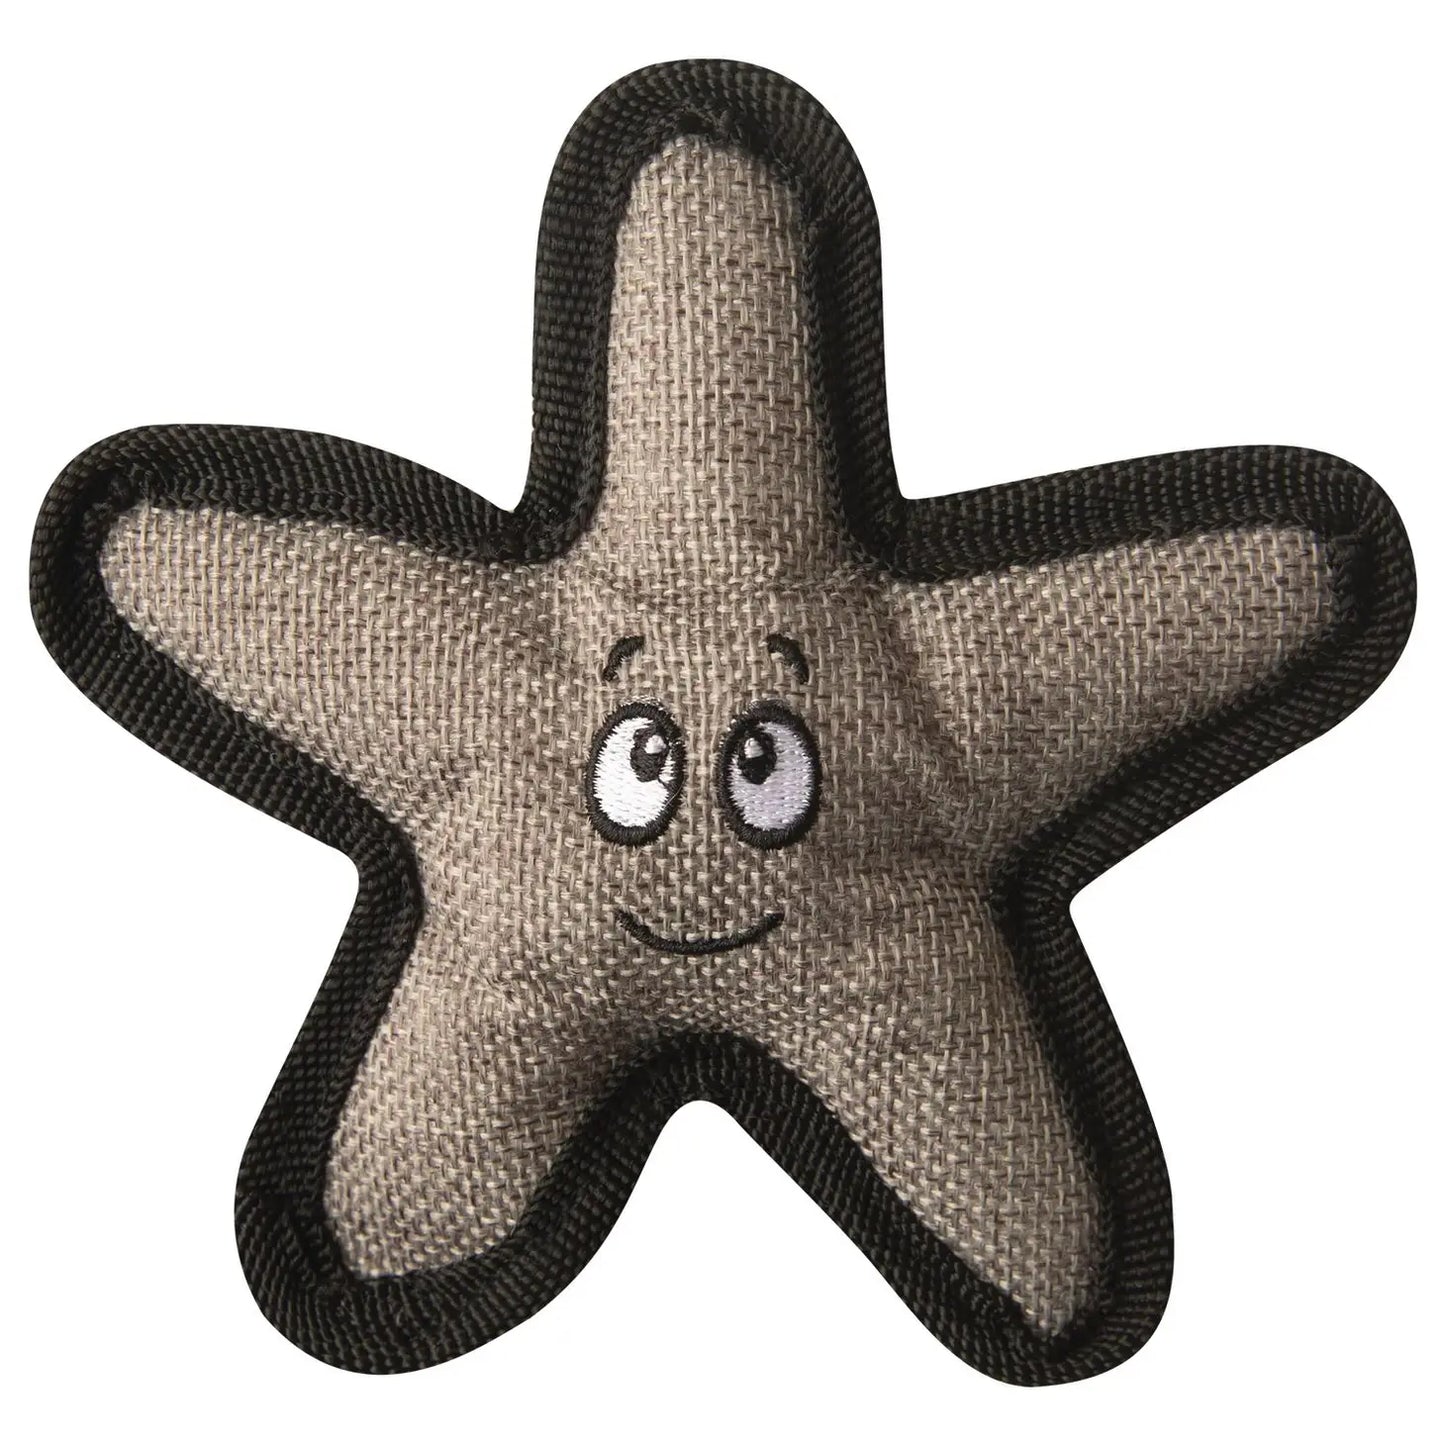 A crinkly starfish dog toy that has a big smile made out of environmentally friendly materials